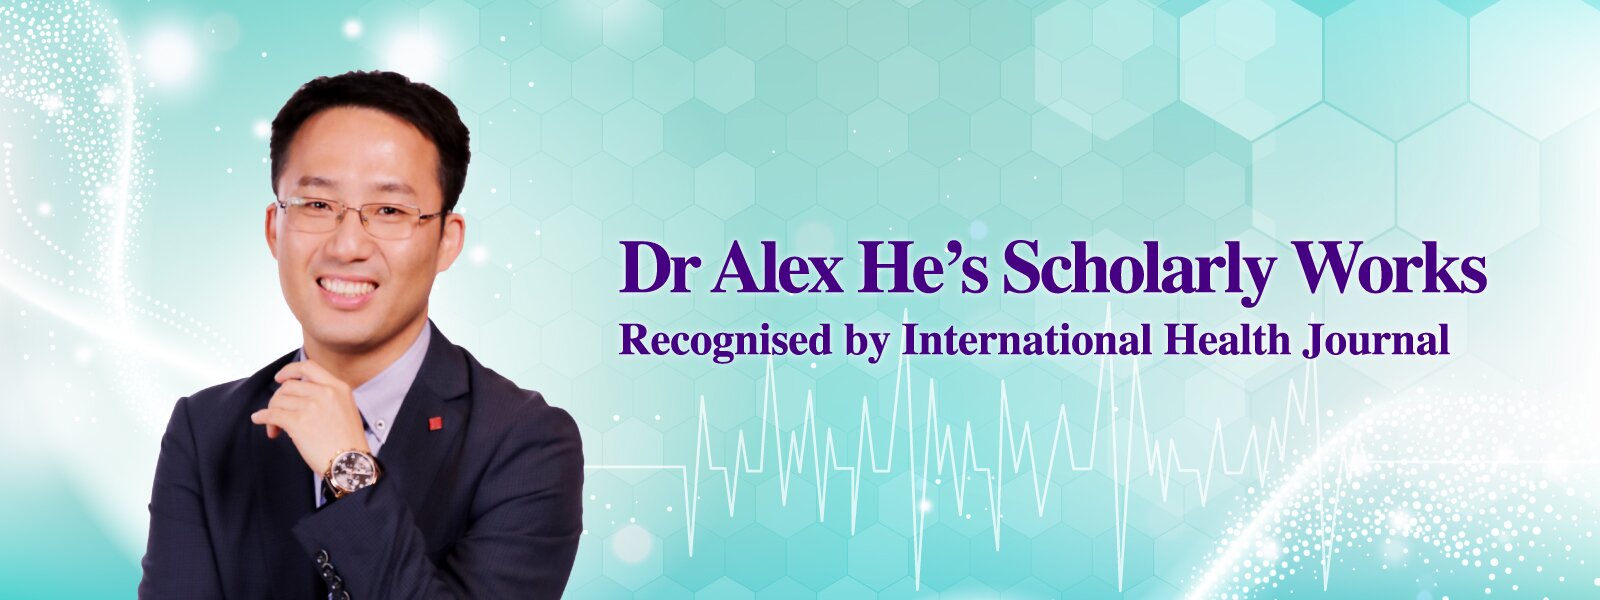 Dr Alex He’s Scholarly Works Recognised by International Health Journal